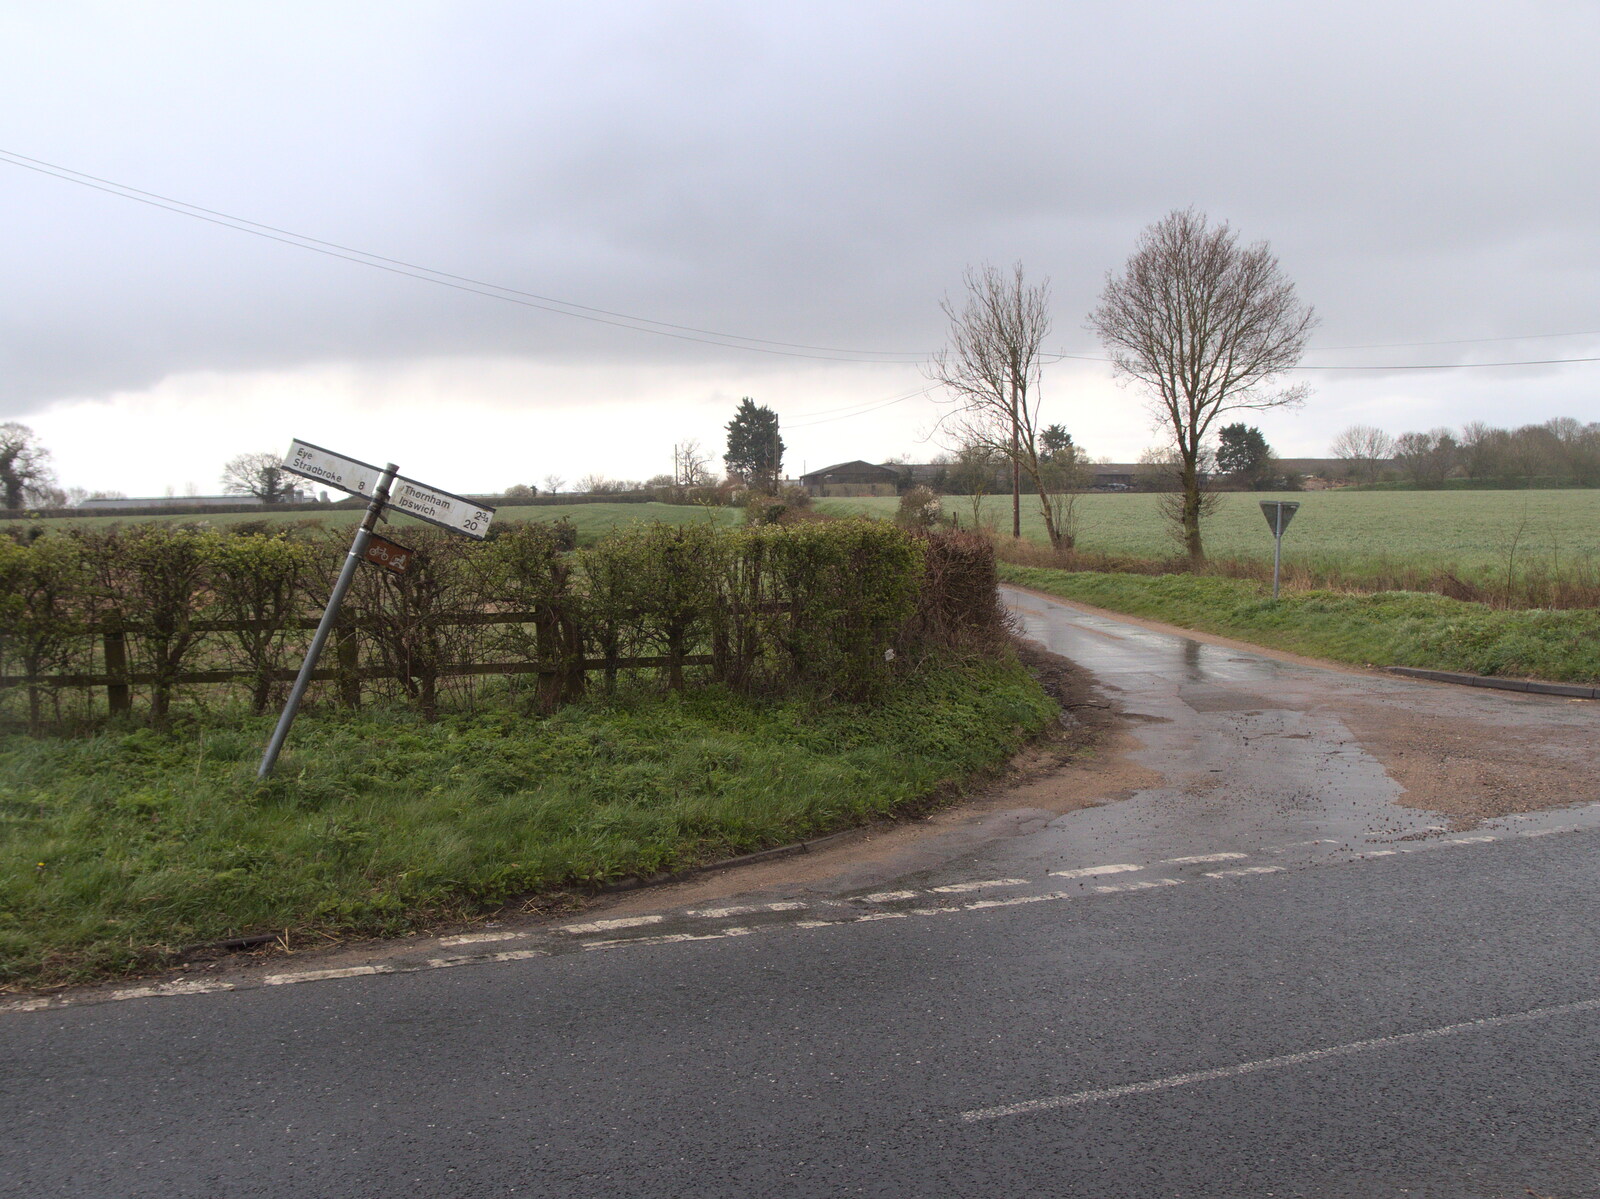 The junction of Yaxley Road and Braiseworth Road from Roadworks and Harry's Trampoline, Brome, Suffolk - 6th April 2021